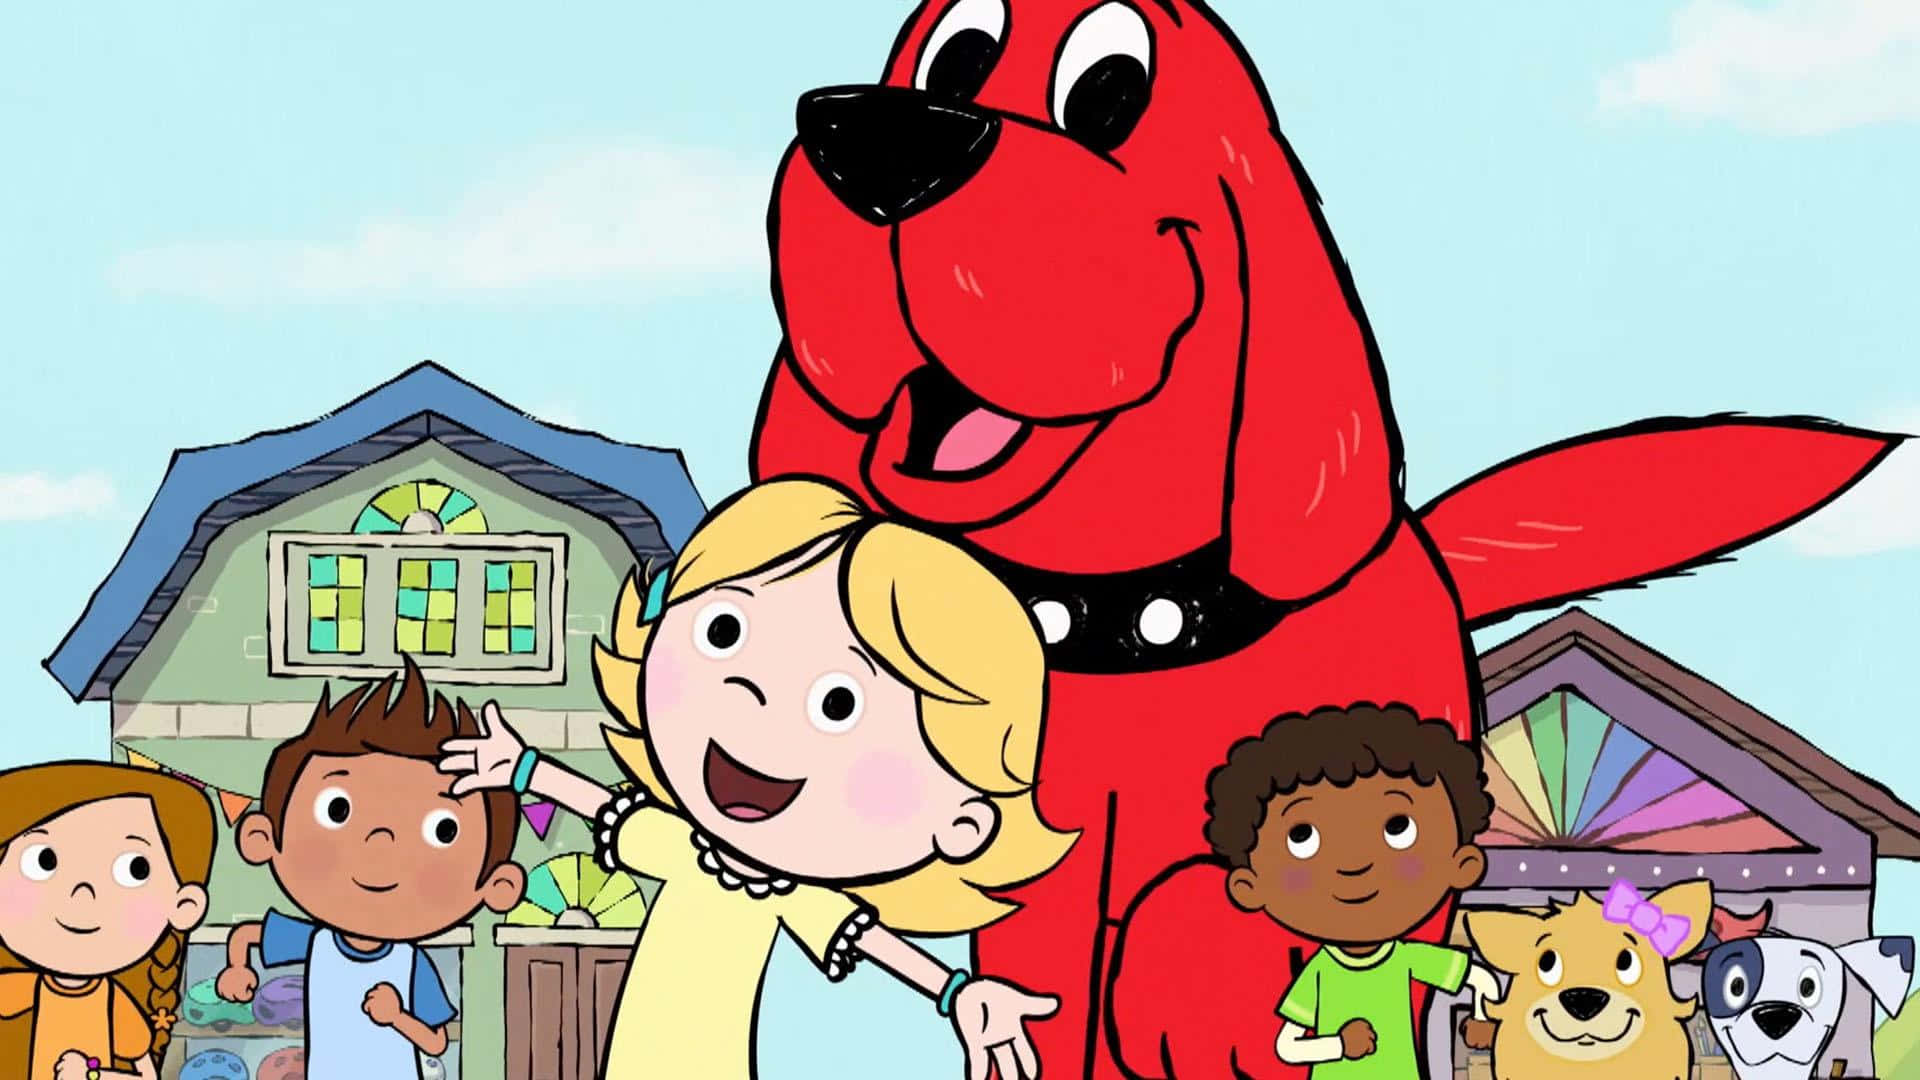 A Cartoon Of A Red Dog With Children And A House